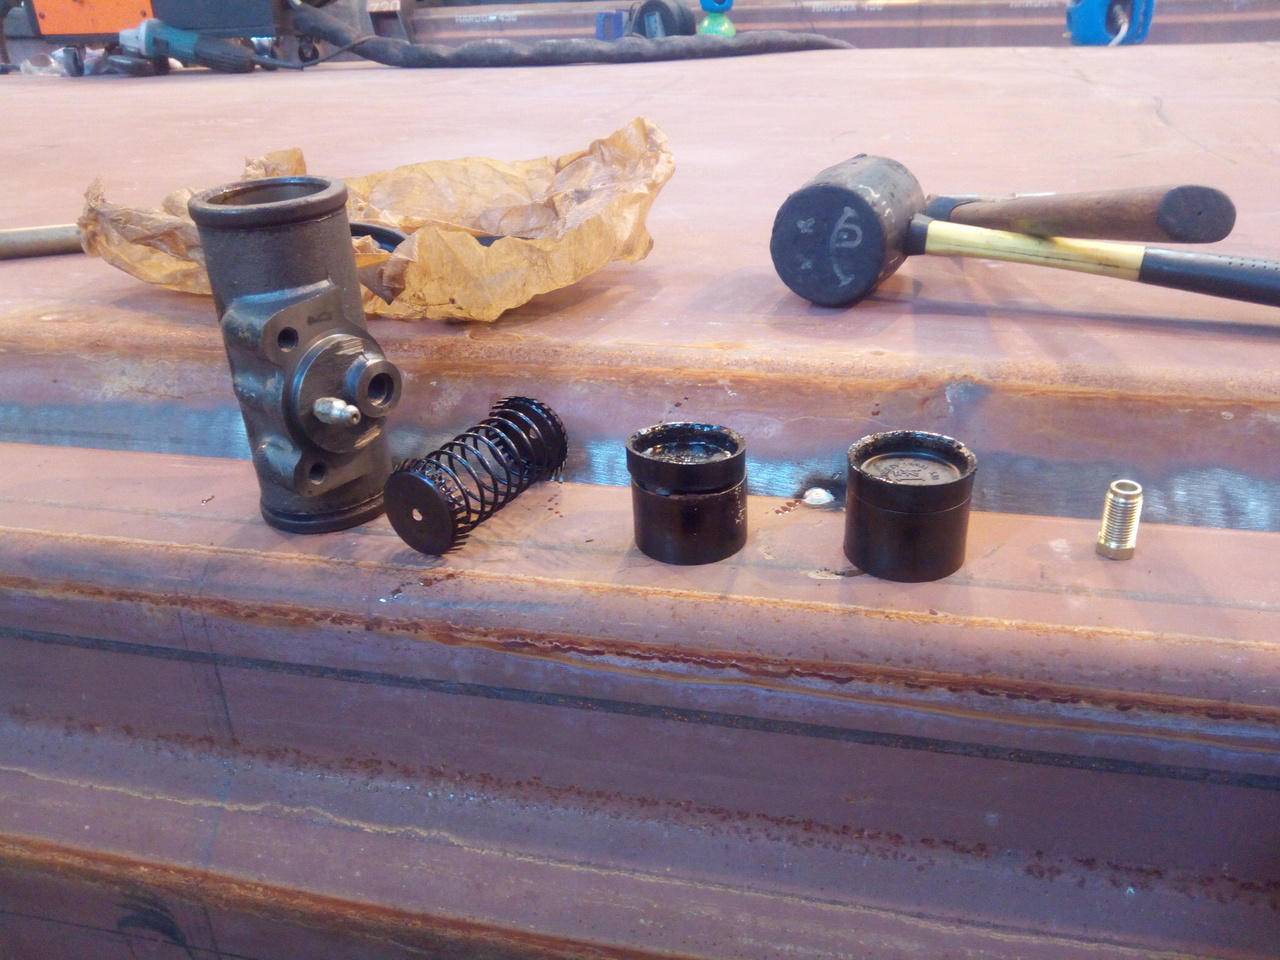 A front wheel cylinder disassembled on an upturned tipper truck
body, there is the outer body of the wheel cylinder, an expansion
spring and then the two seals and pistons that the brake fluid
operates on. One of the cup seals is sitting up at a funny angle.